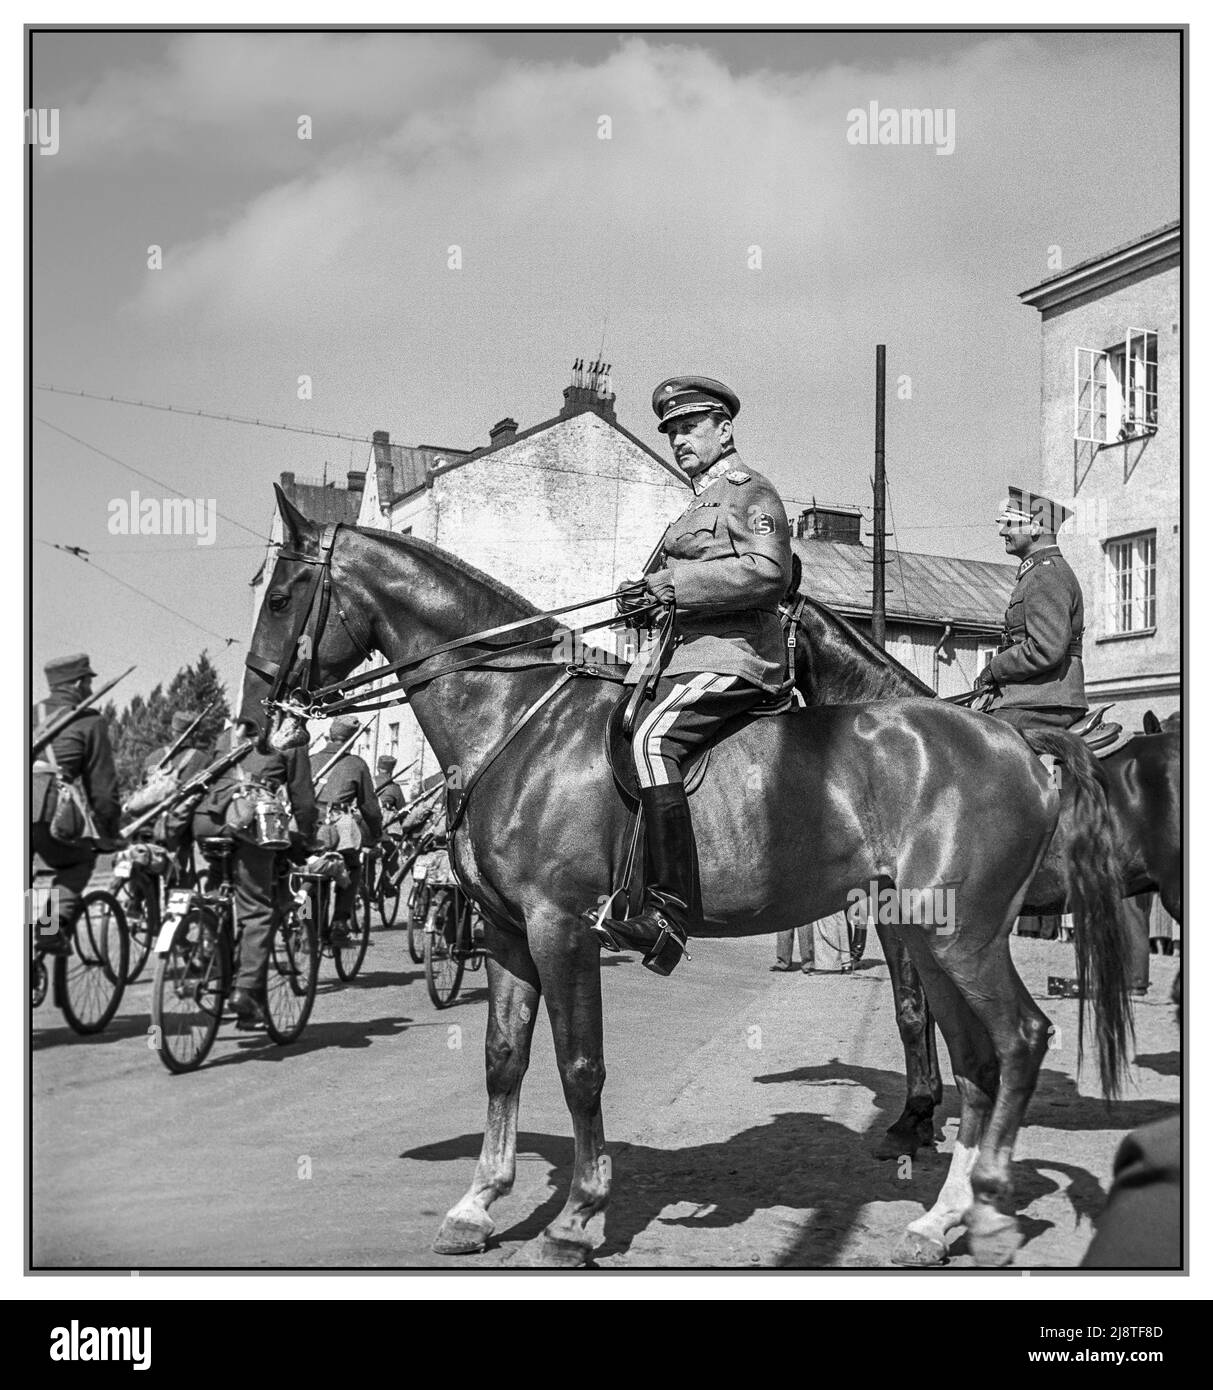 MANNERHEIM WW2 Commander-in-chief, Marshal Carl Gustav Mannerheim on his parade horse reviewing the parading troops some on bicycles in Viipuri, Finland 1939. Stock Photo